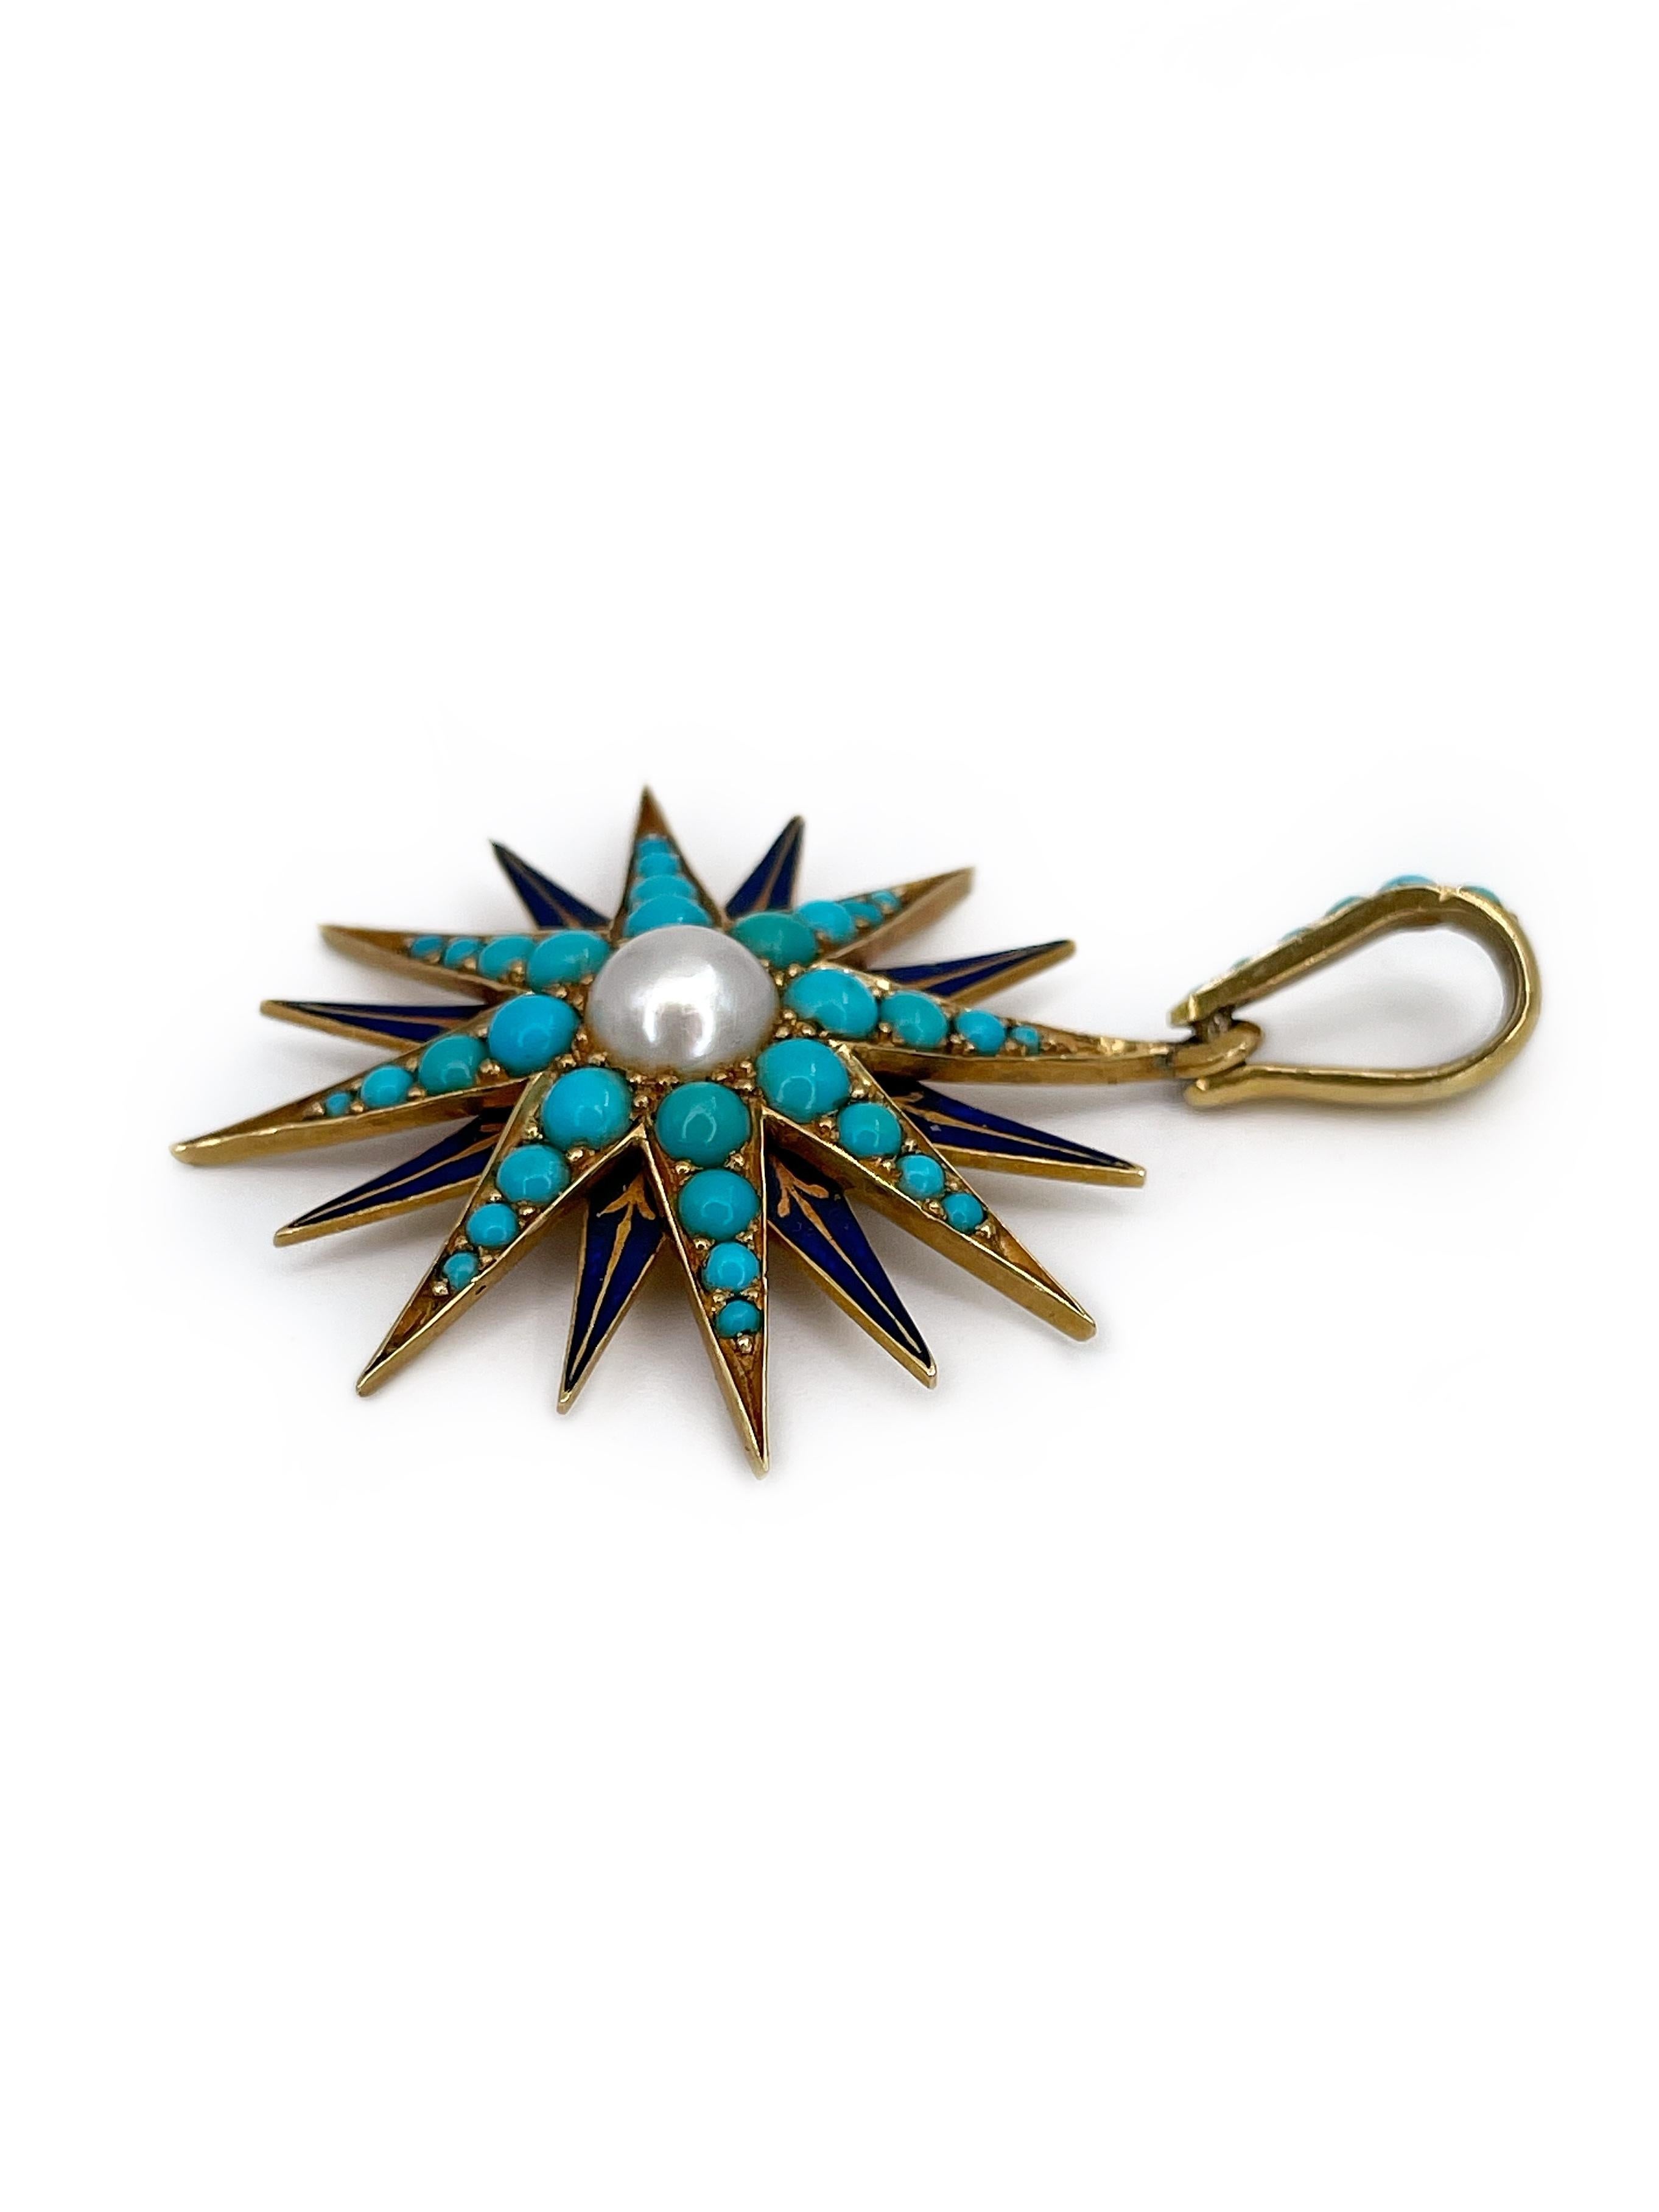 This is a lovely Victorian starburst pendant necklace crafted in 18K yellow gold. It features one cultured pearl (~6mm) and 38 turquoises. The piece is adorned with blue enamel which condition is good. 

Weight: 5.66g
Length: 4.5cm
Diameter: